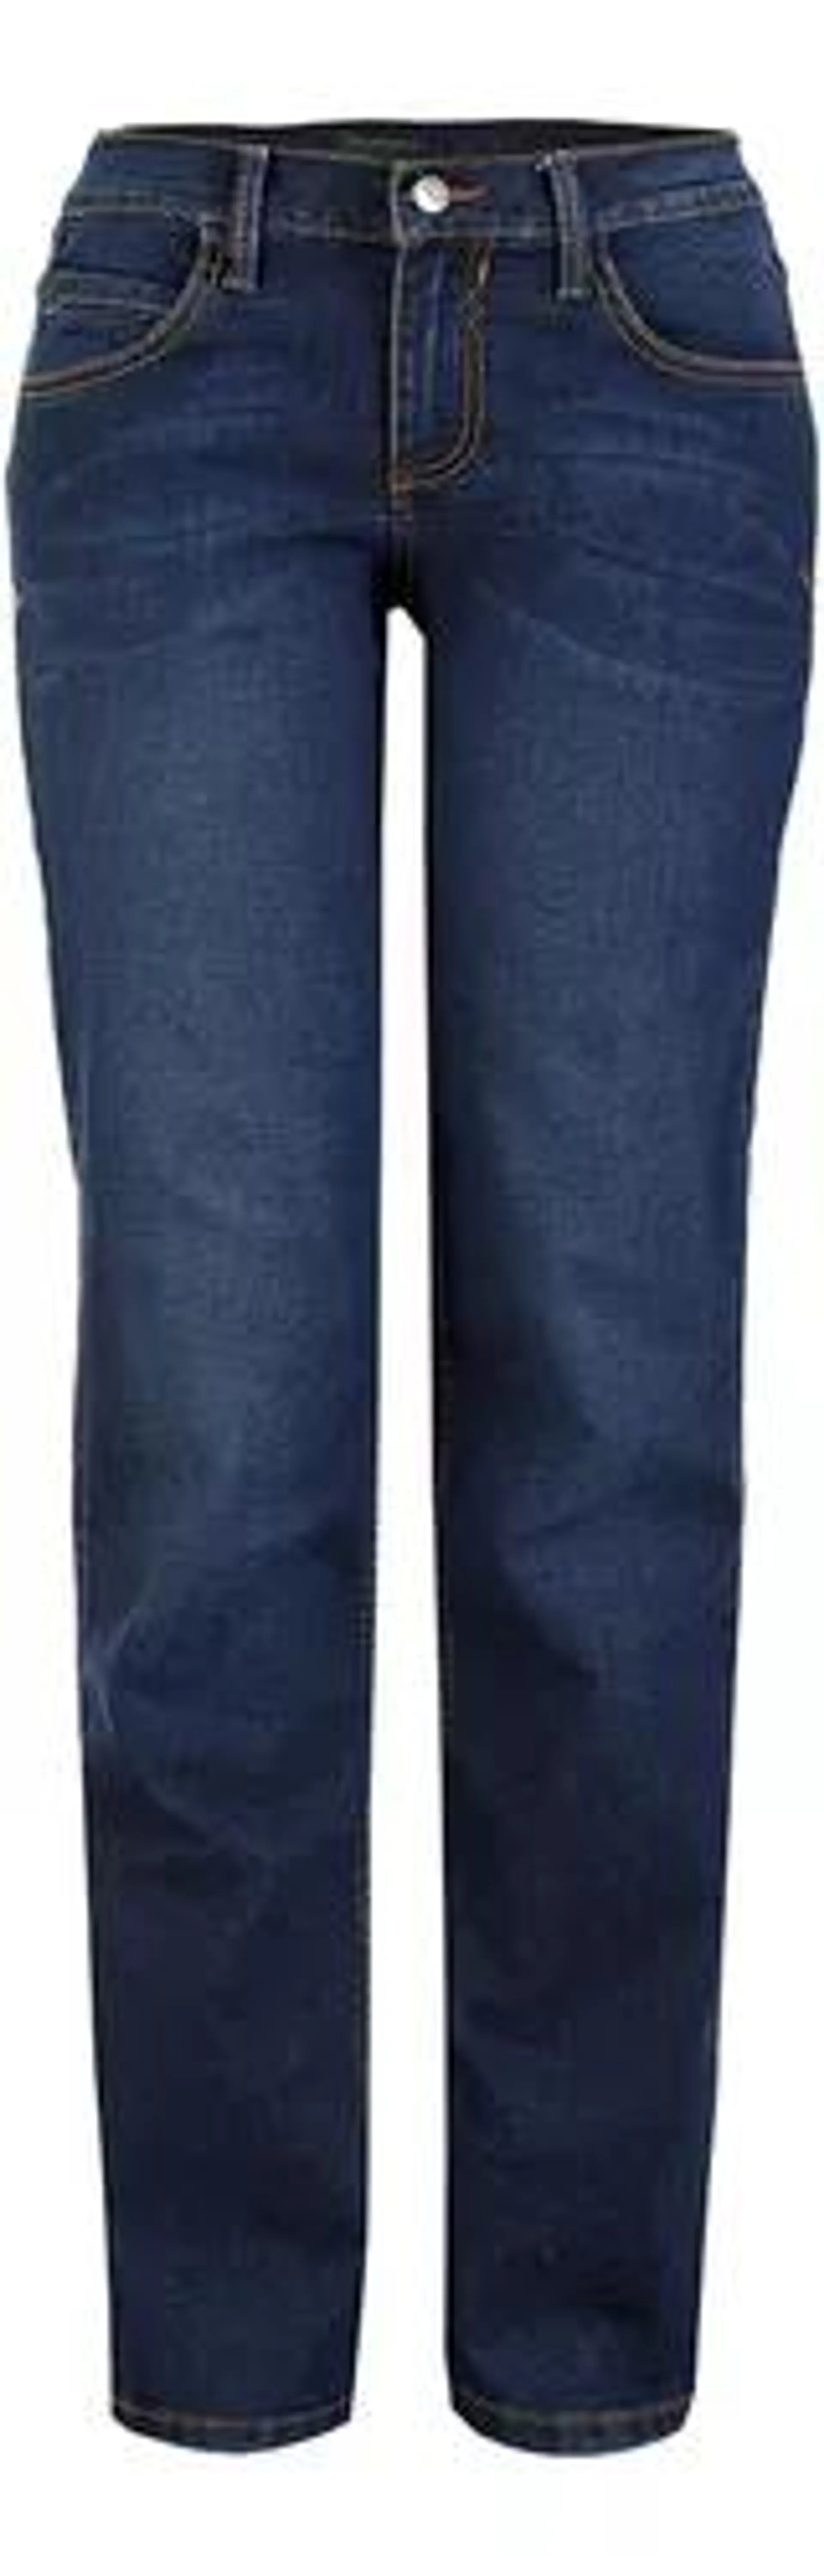 Jeans Vaquero Wrangler Mujer Low Rise C5a